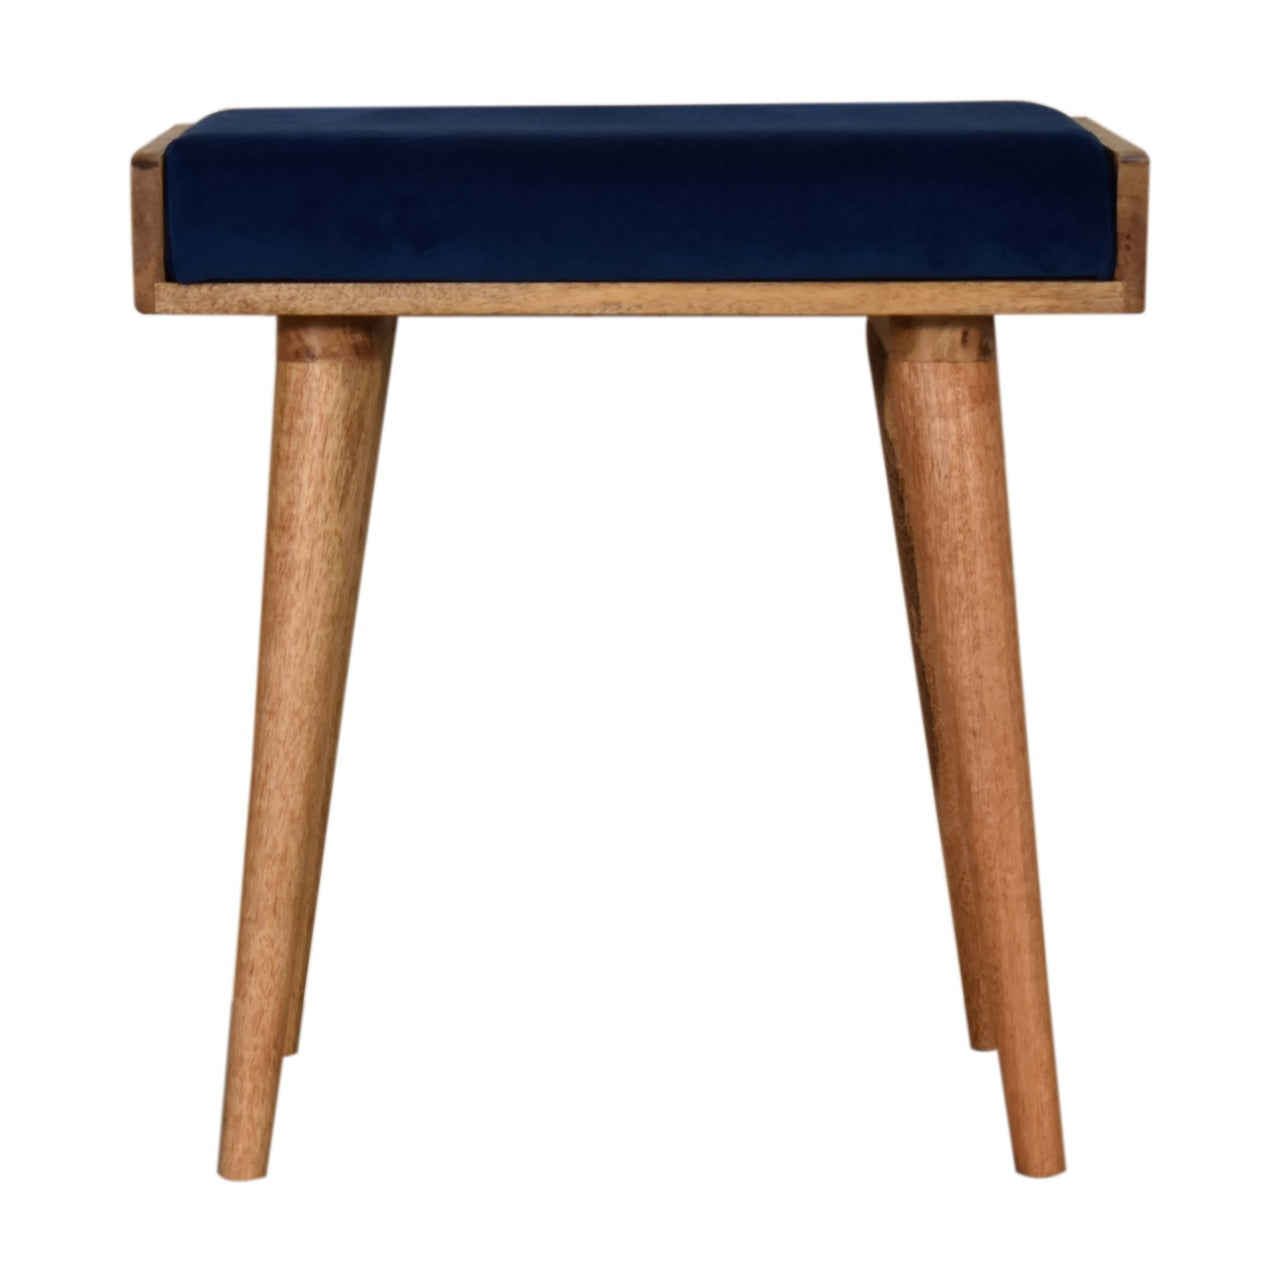 View Royal Blue Velvet Tray Style Footstool information